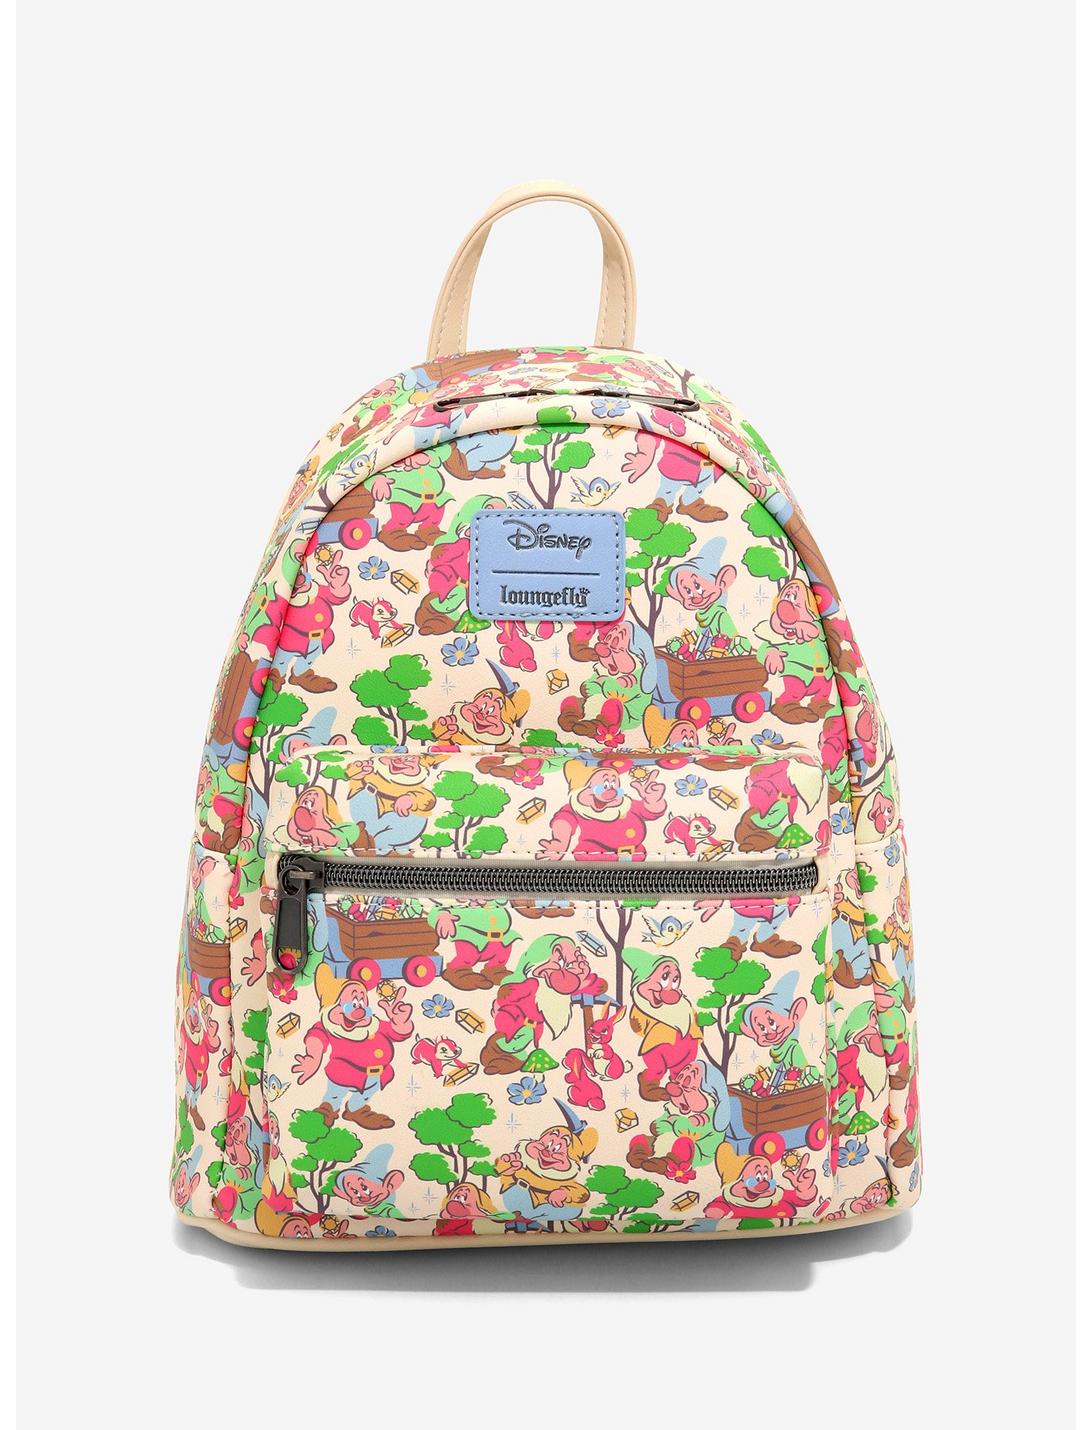 Loungefly Snow White and The Seven Dwarfs All Over Print Mini Backpack